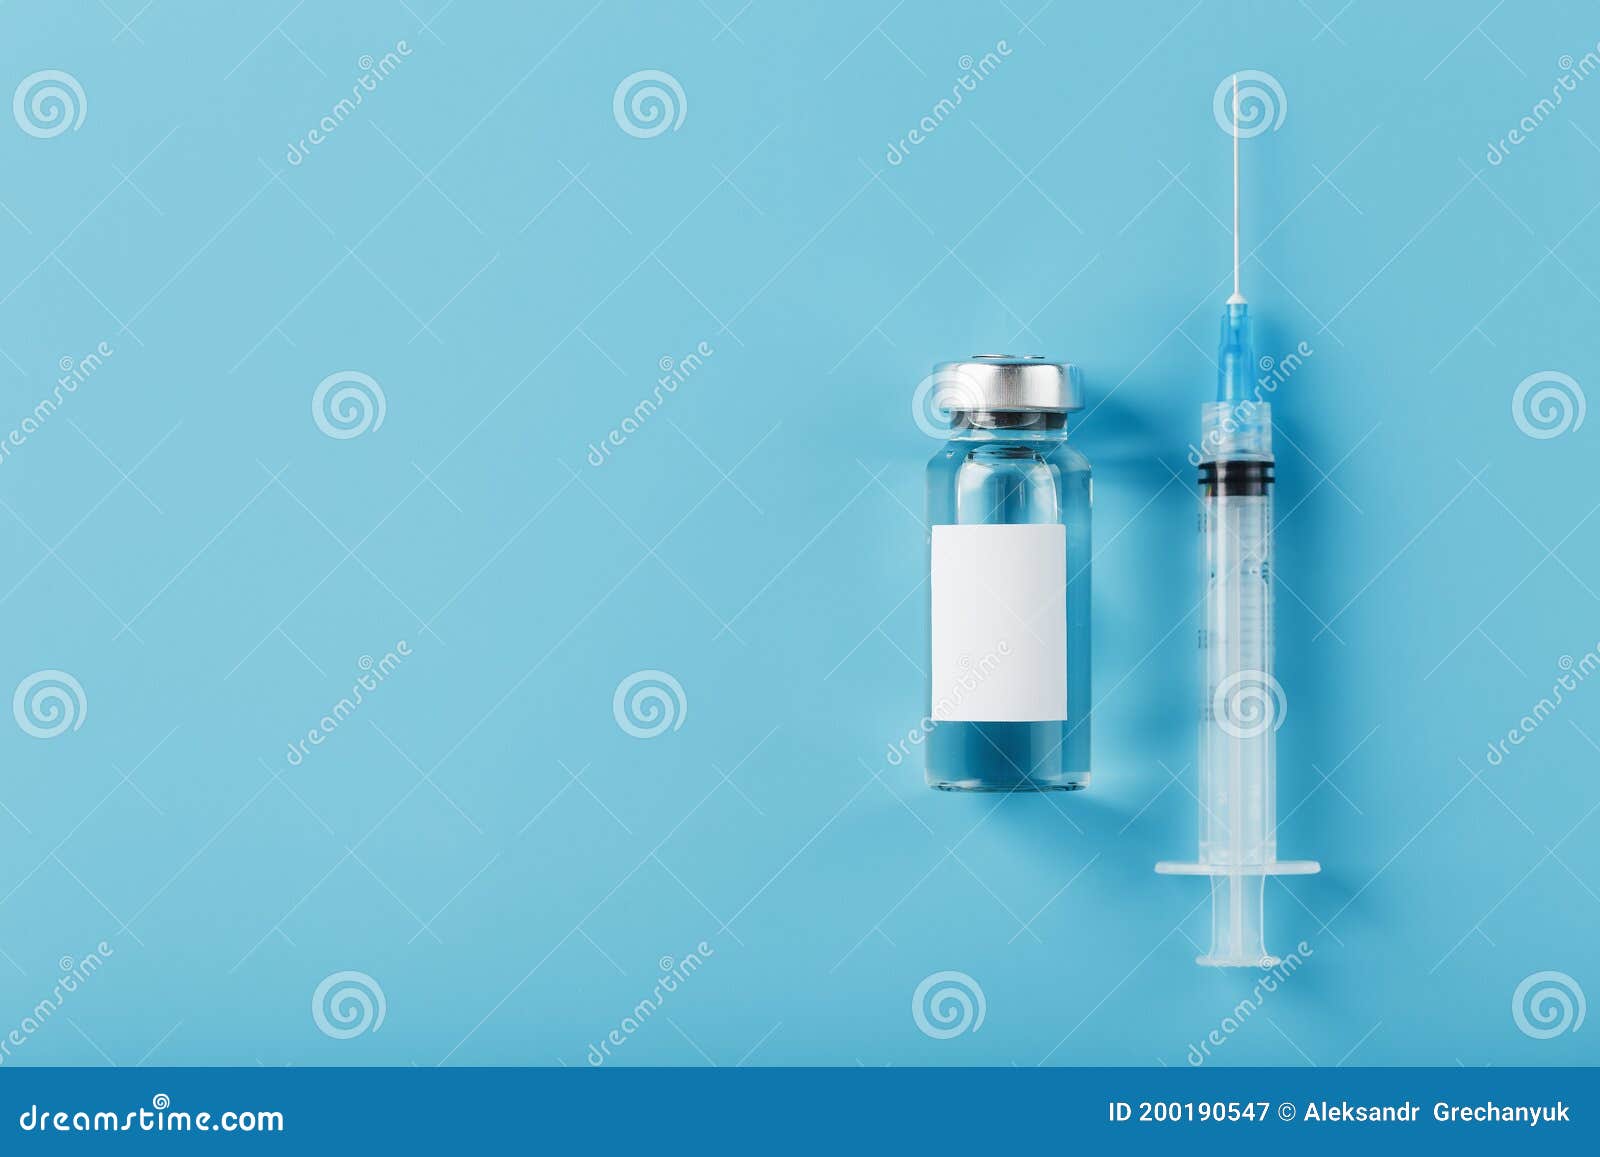 ampoule with a vaccine and a syringe for viruses and diseases on a blue background